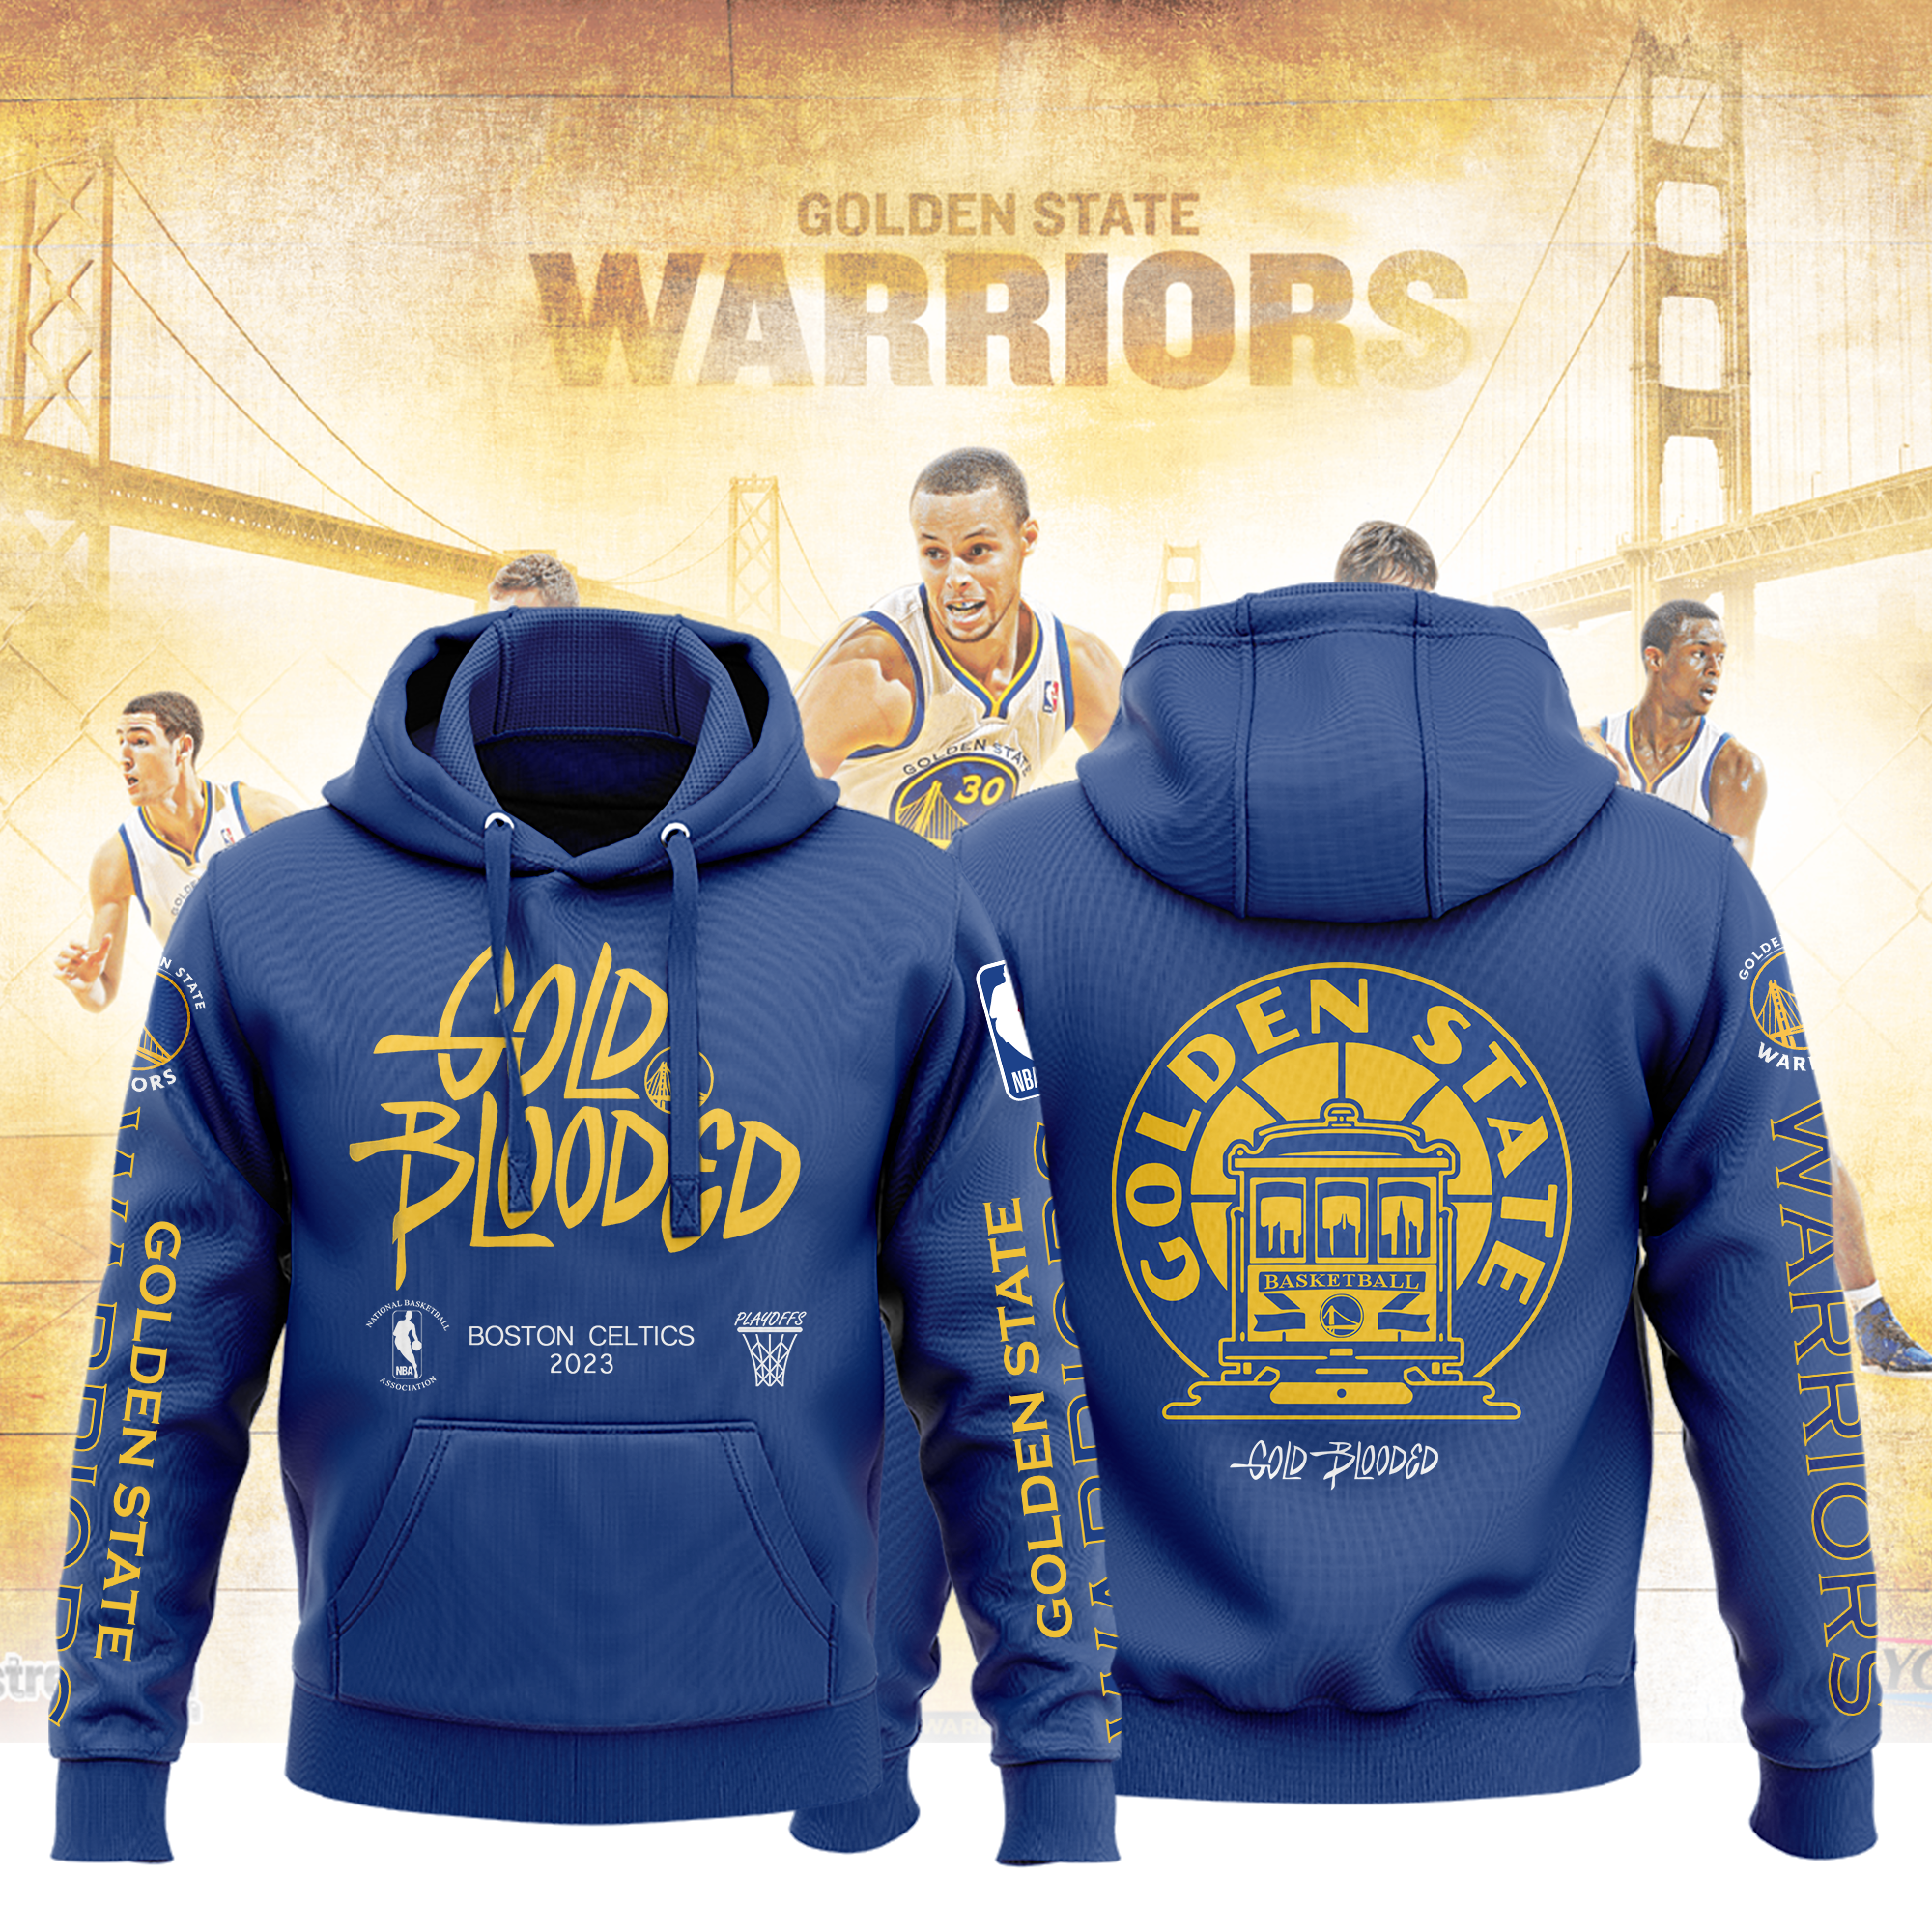 Golden State Warriors 2022'23 Legend On-court Practice Performance  Shirt,Sweater, Hoodie, And Long Sleeved, Ladies, Tank Top